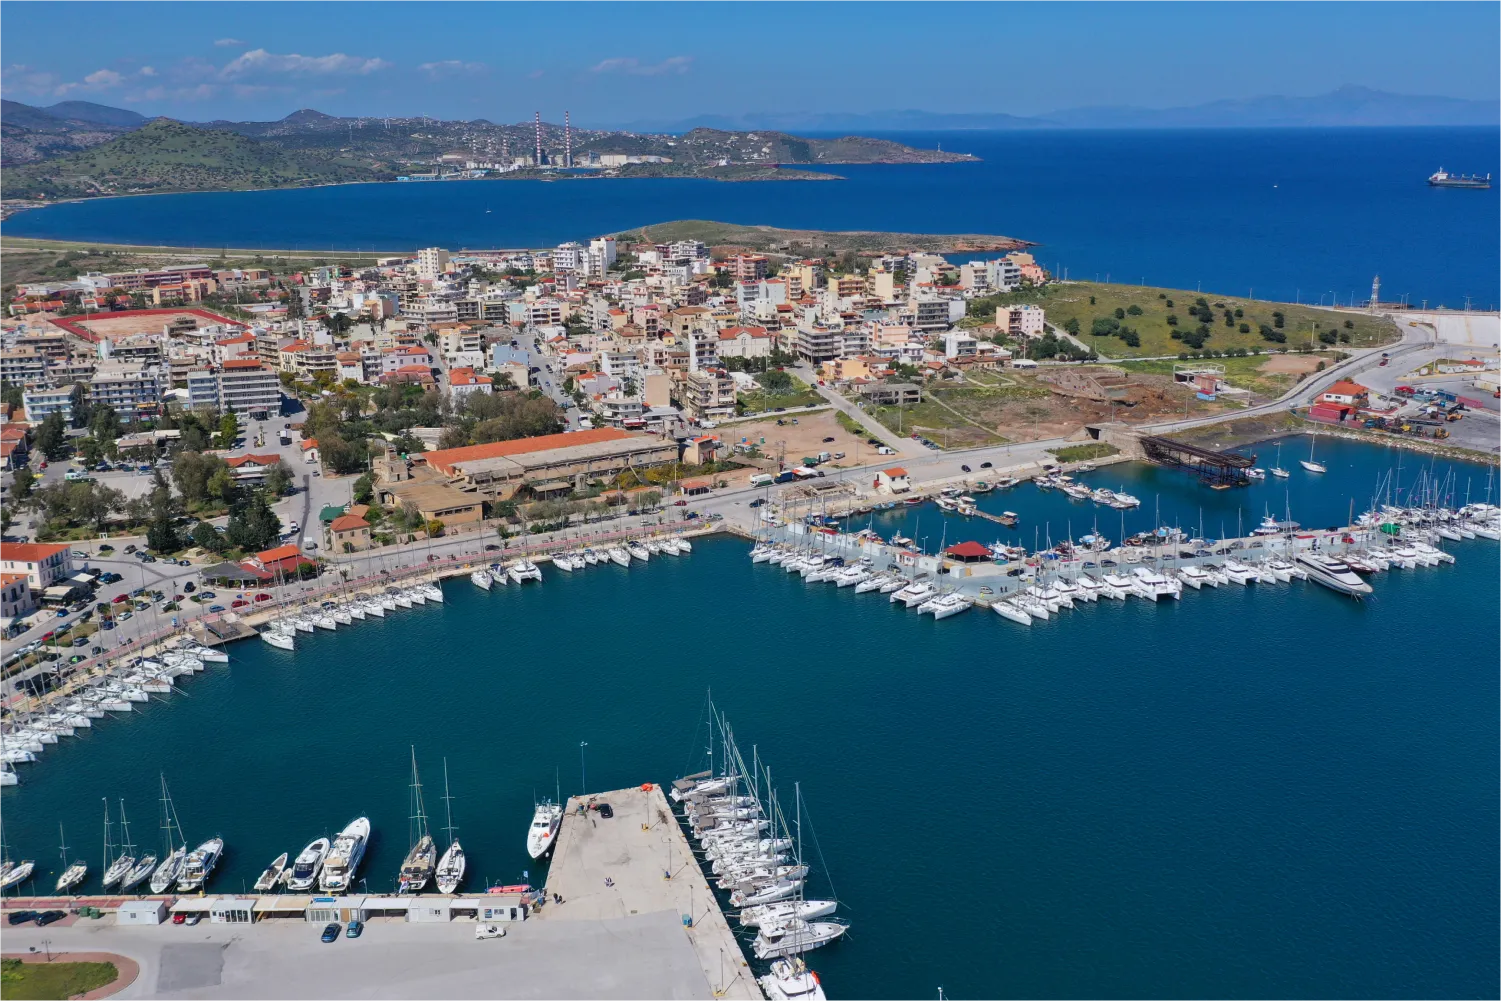 Aerial Photo Of the Port Of Lavrio With yachts parked